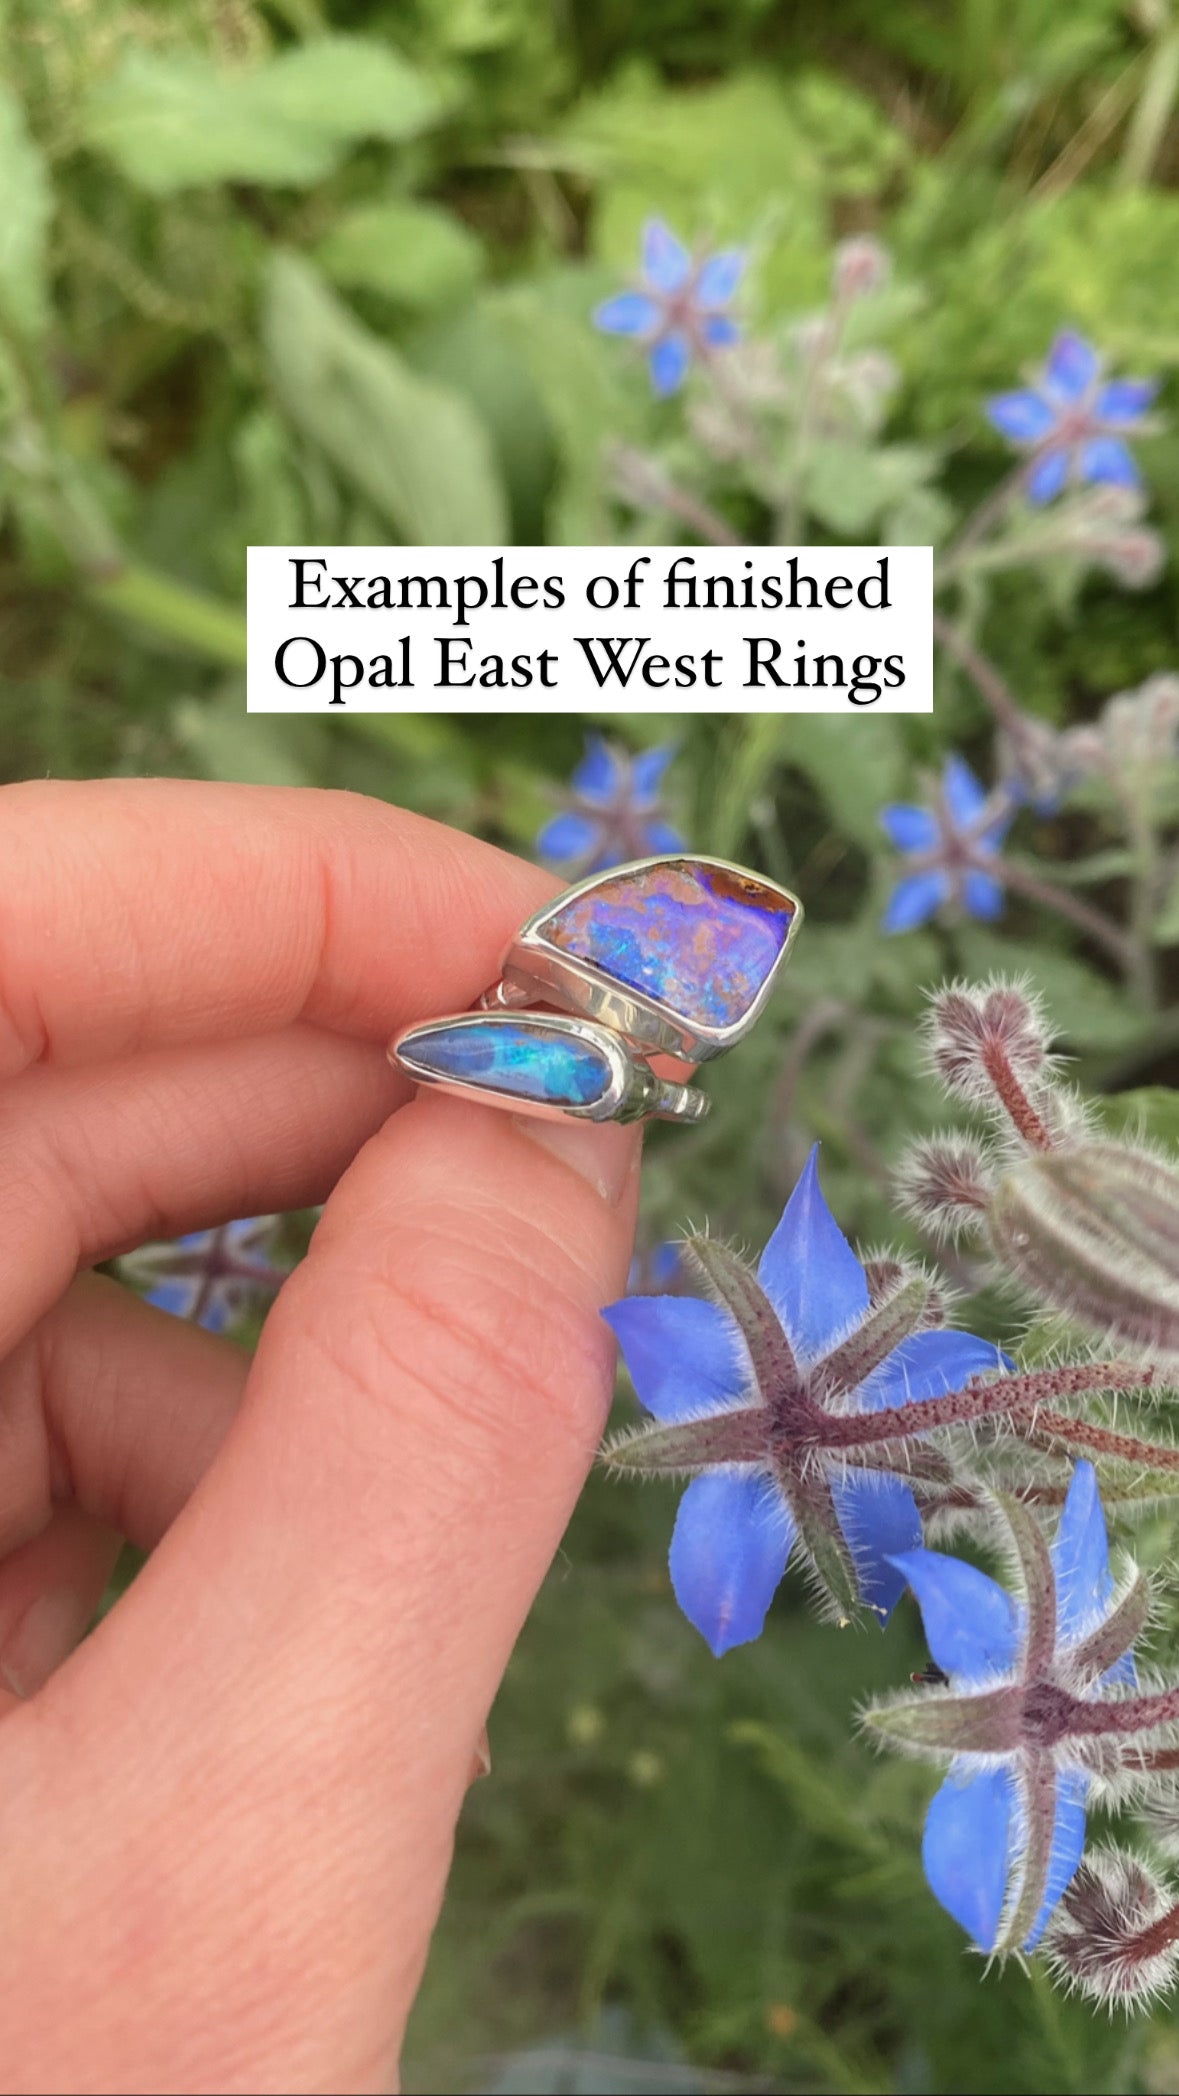 Opal East West Ring #3 (Pre-Order) ◇ Australian Opal ◇ Made in your size